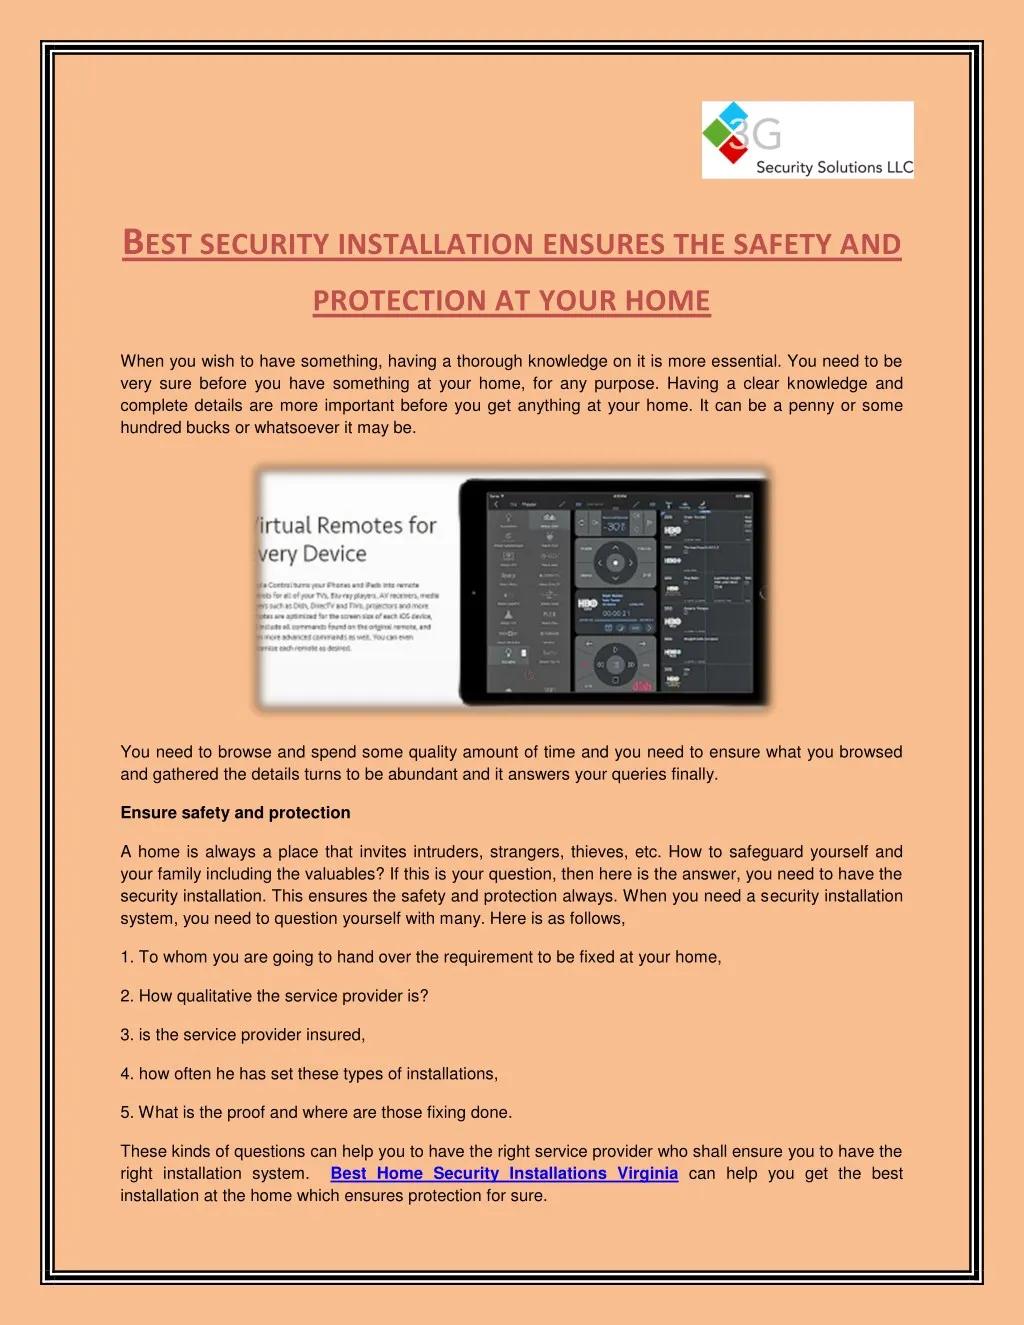 b est security installation ensures the safety and